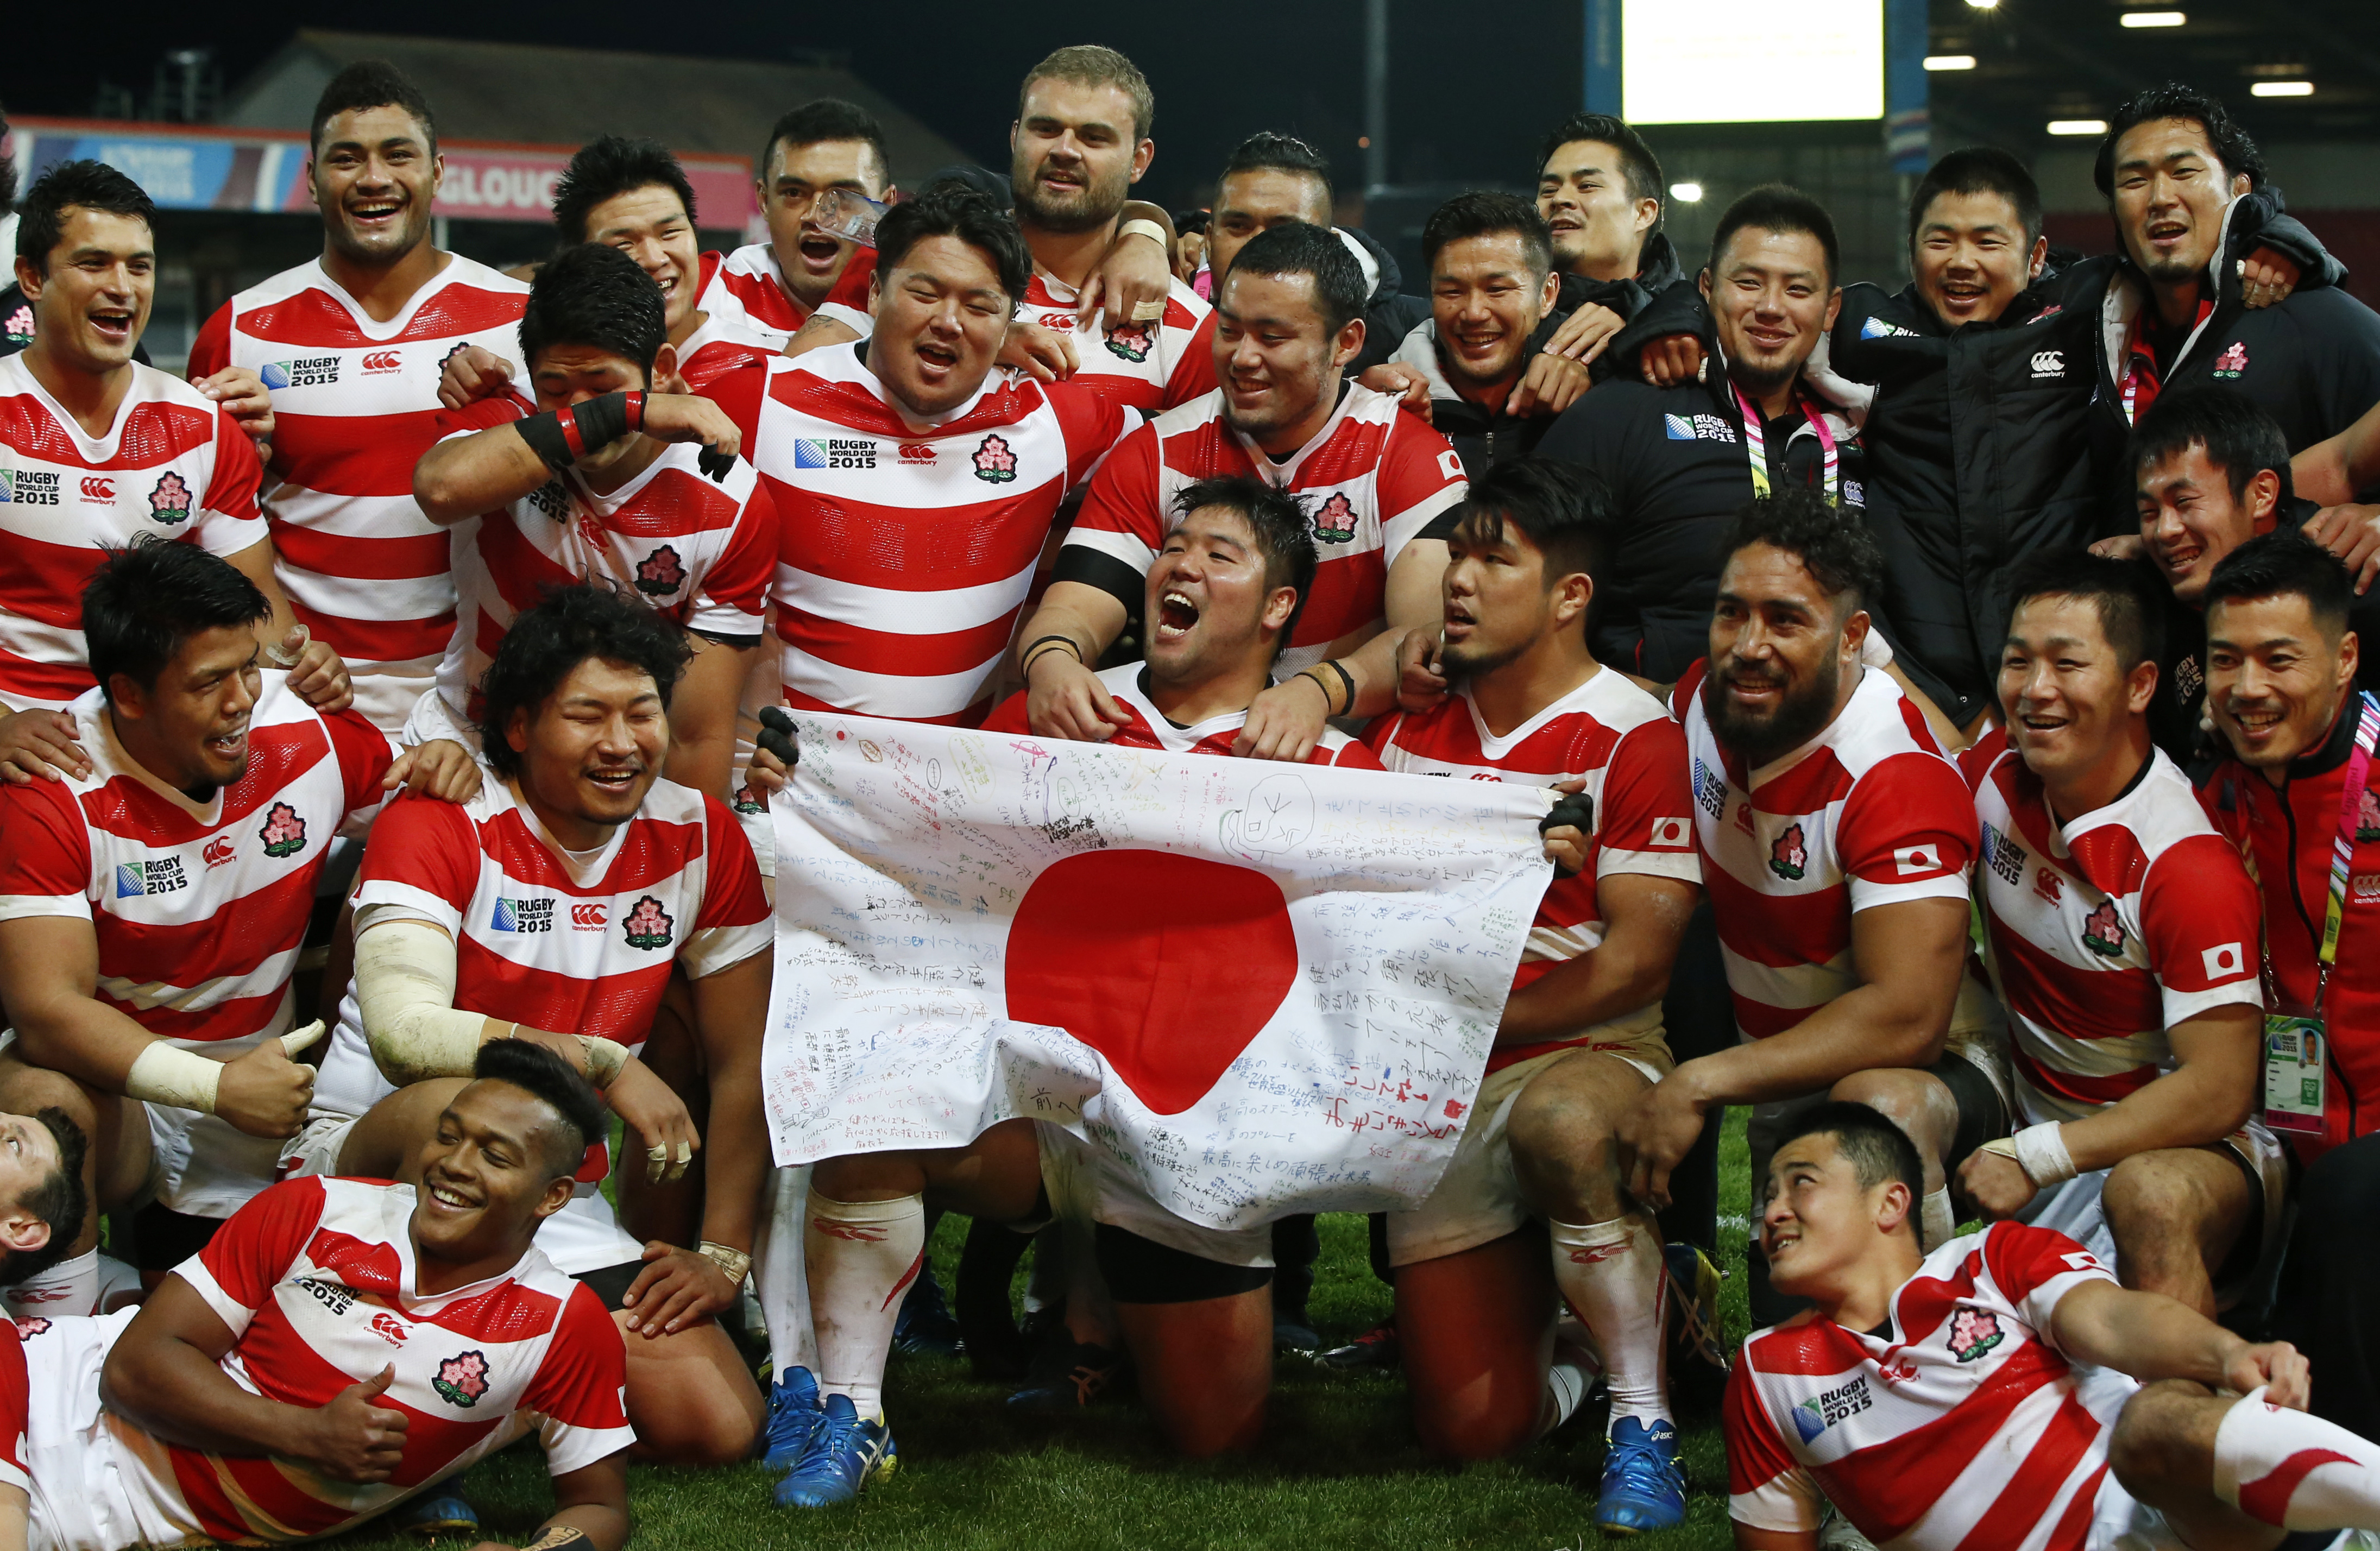 Multicultural maul: The Brave Blossoms celebrate after beating the USA in the Rugby World Cup in England on Oct. 11. Could the talented national team serve as a model or template for a multicultural Japan of the future? | REUTERS